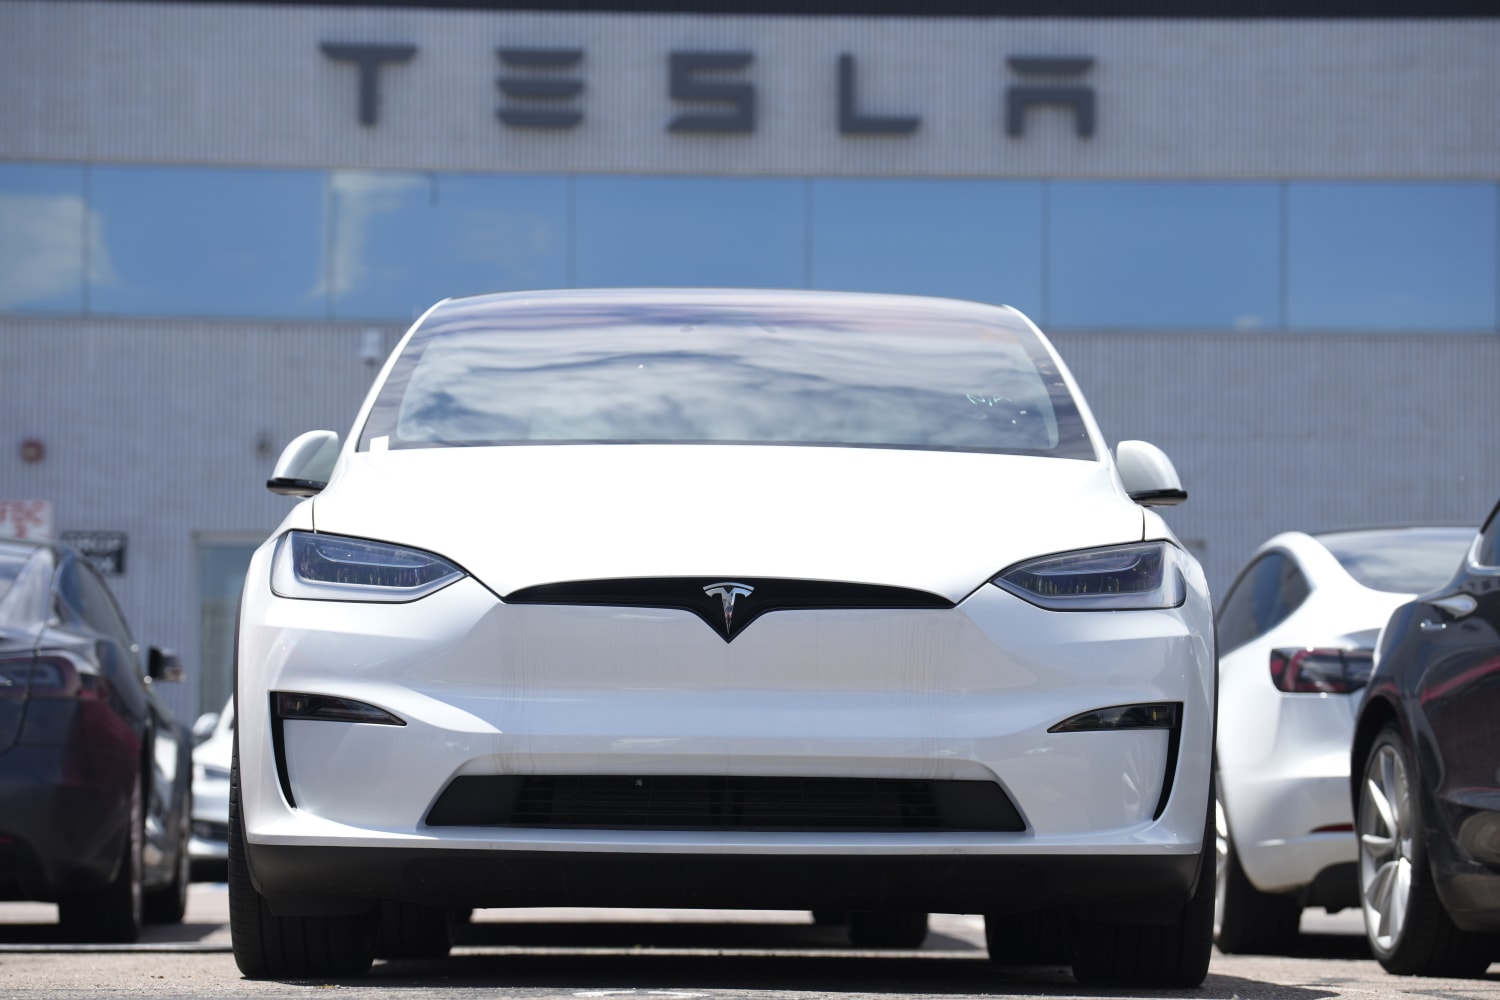 Tesla is reducing the prices of its Model Y, S and X cars in the United States after a difficult week